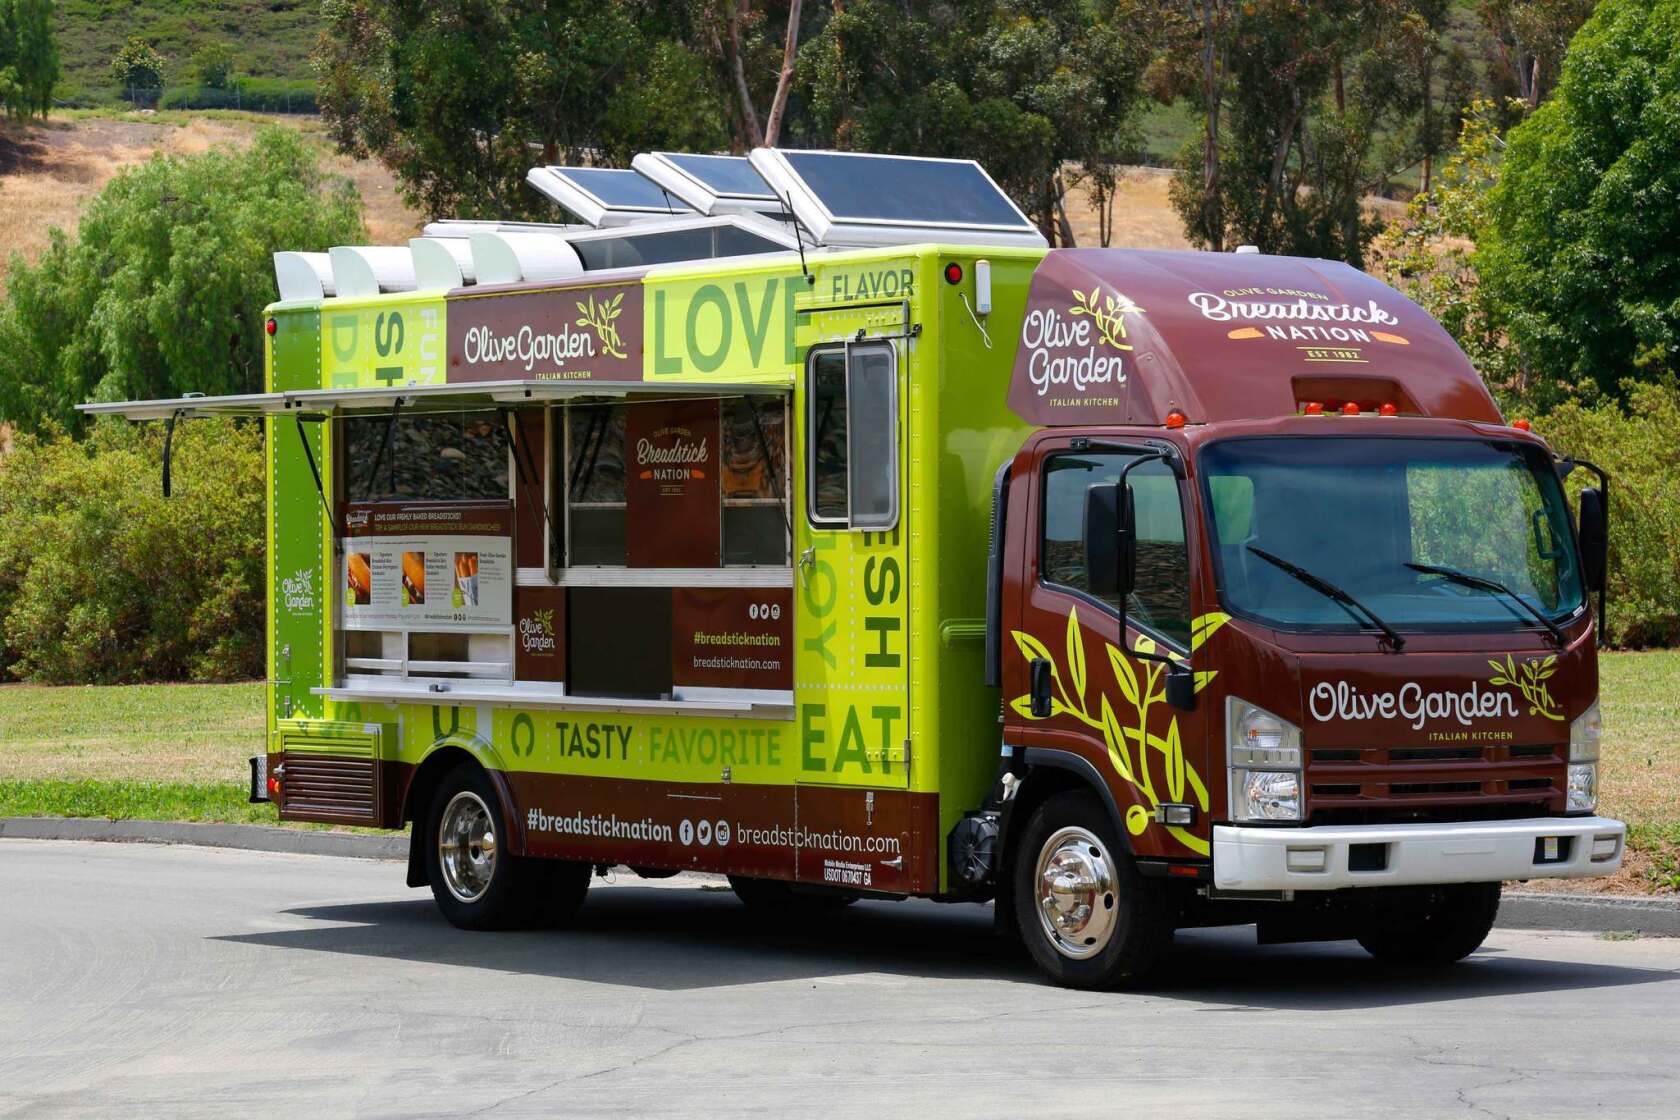 Olive Garden Food Truck Heads To Socal With Free Breadstick